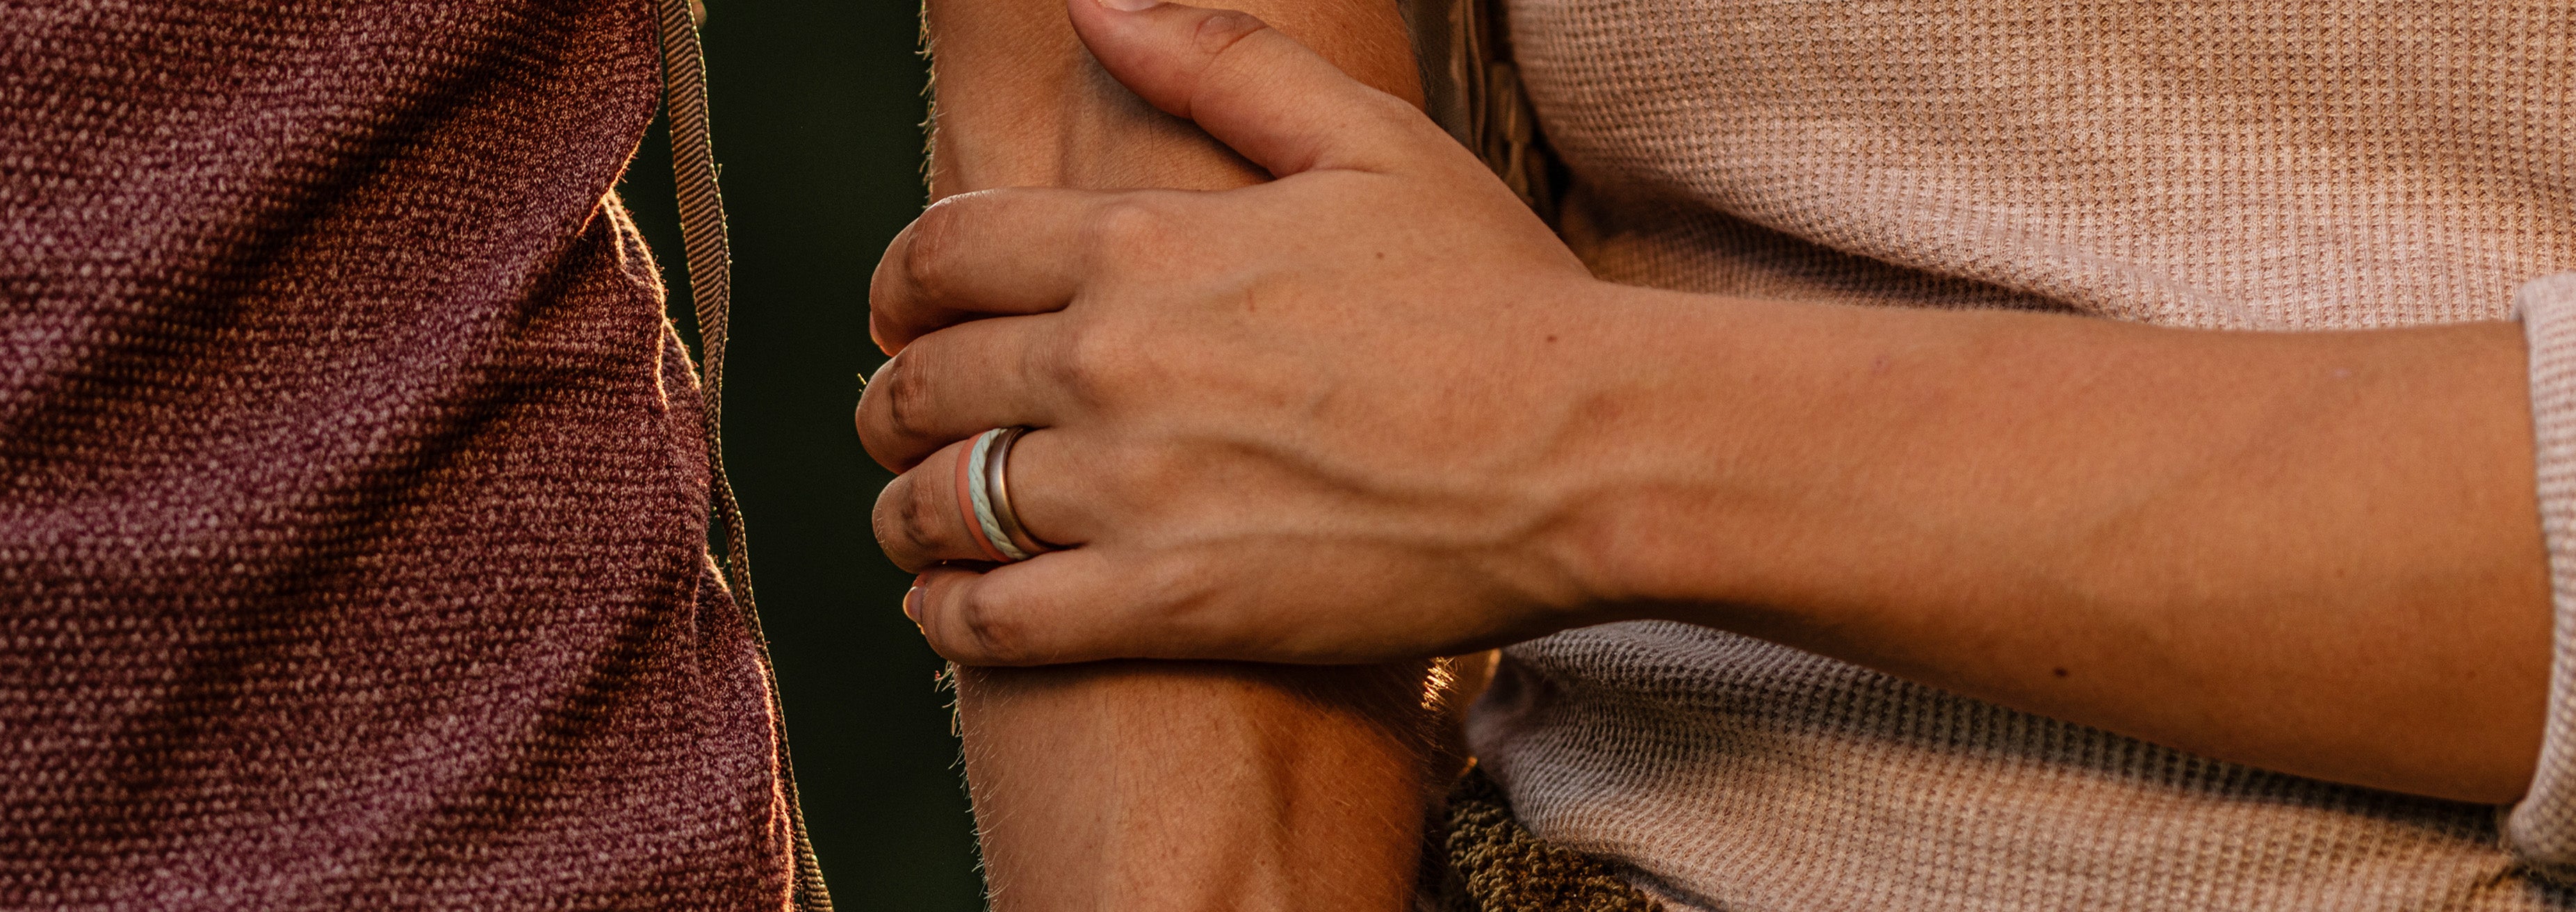 Euphoria - Stackable Ring lifestyle image 3